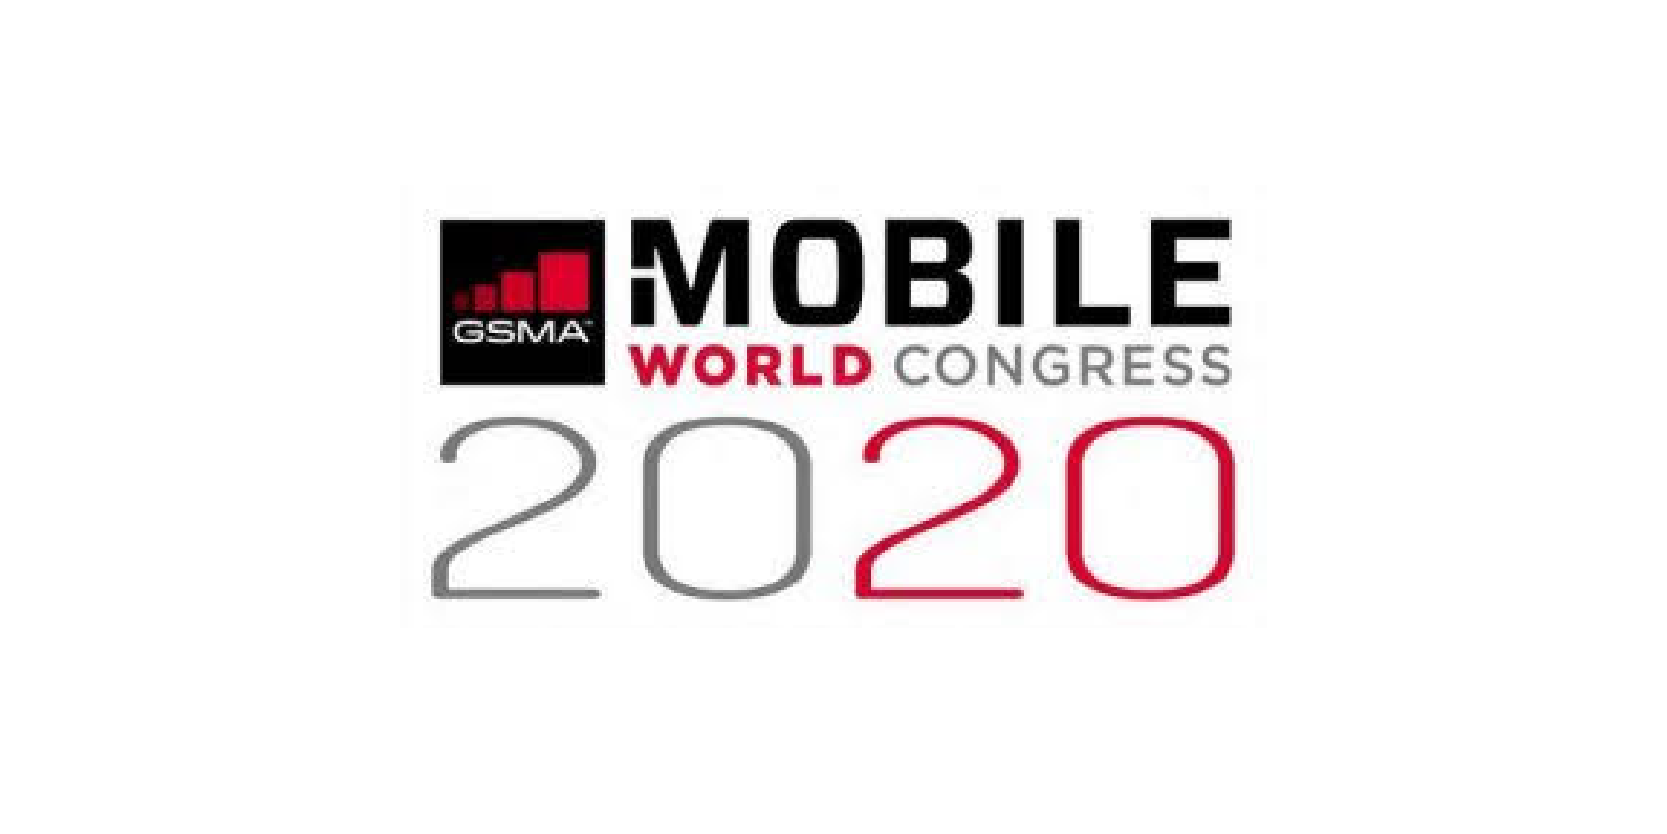 Meet the DIDWW team at the Mobile World Congress 2020